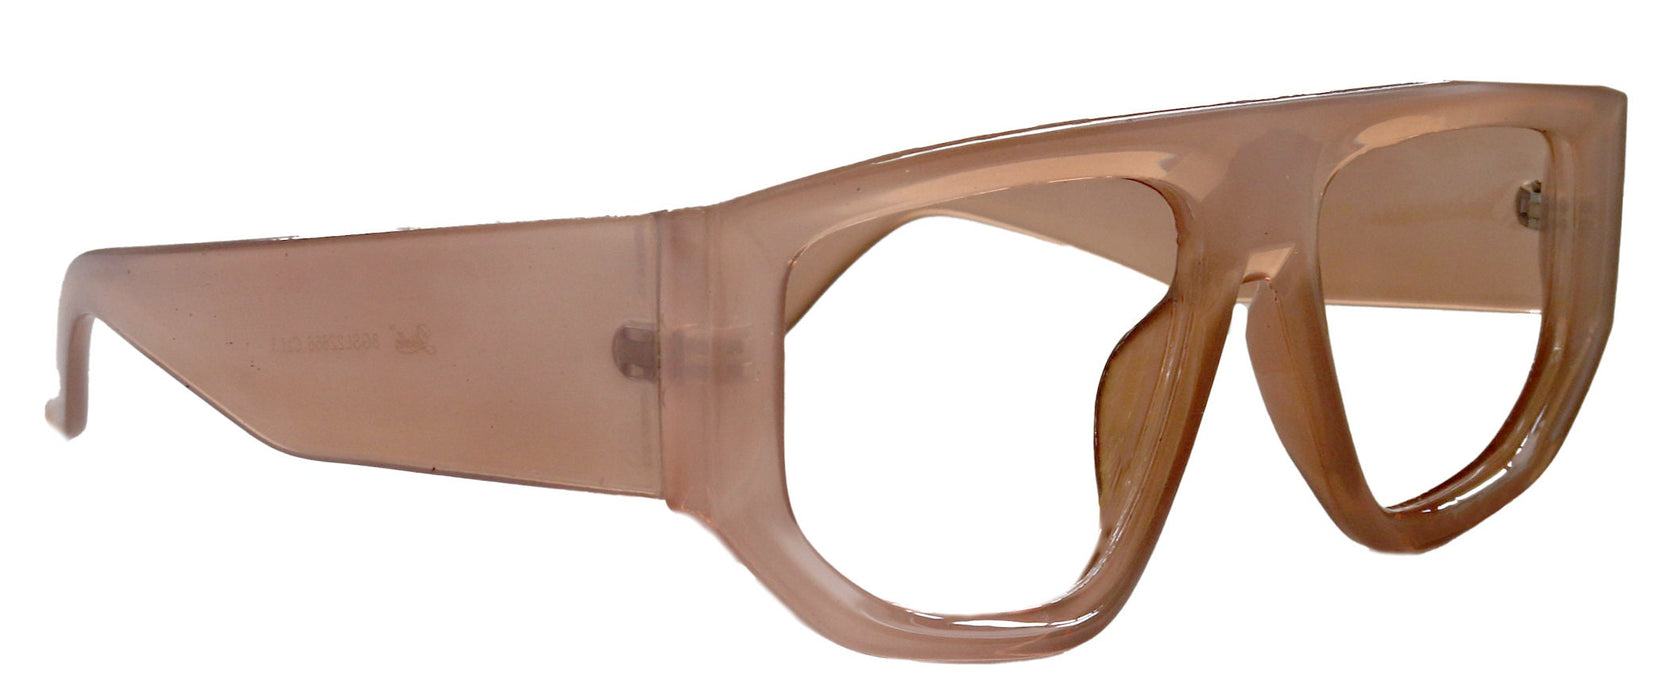 Goliath High End Bifocal or Non-Bifocal Brown Reading Glasses Square, Inspired by NY Fifth Avenue